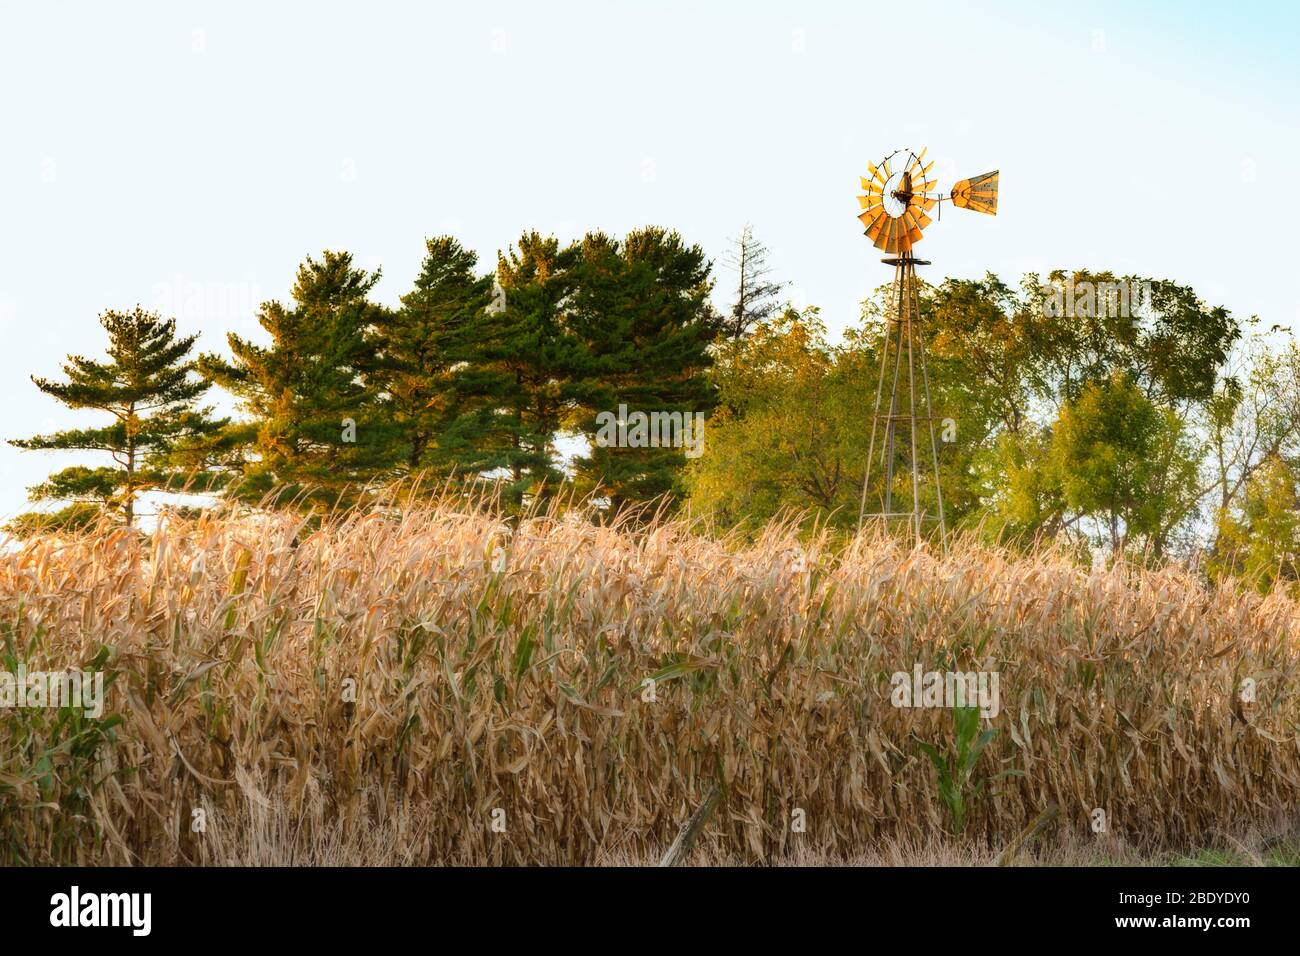 Corn stalks in foreground with ood windmill and trees in background during fall Stock Photo